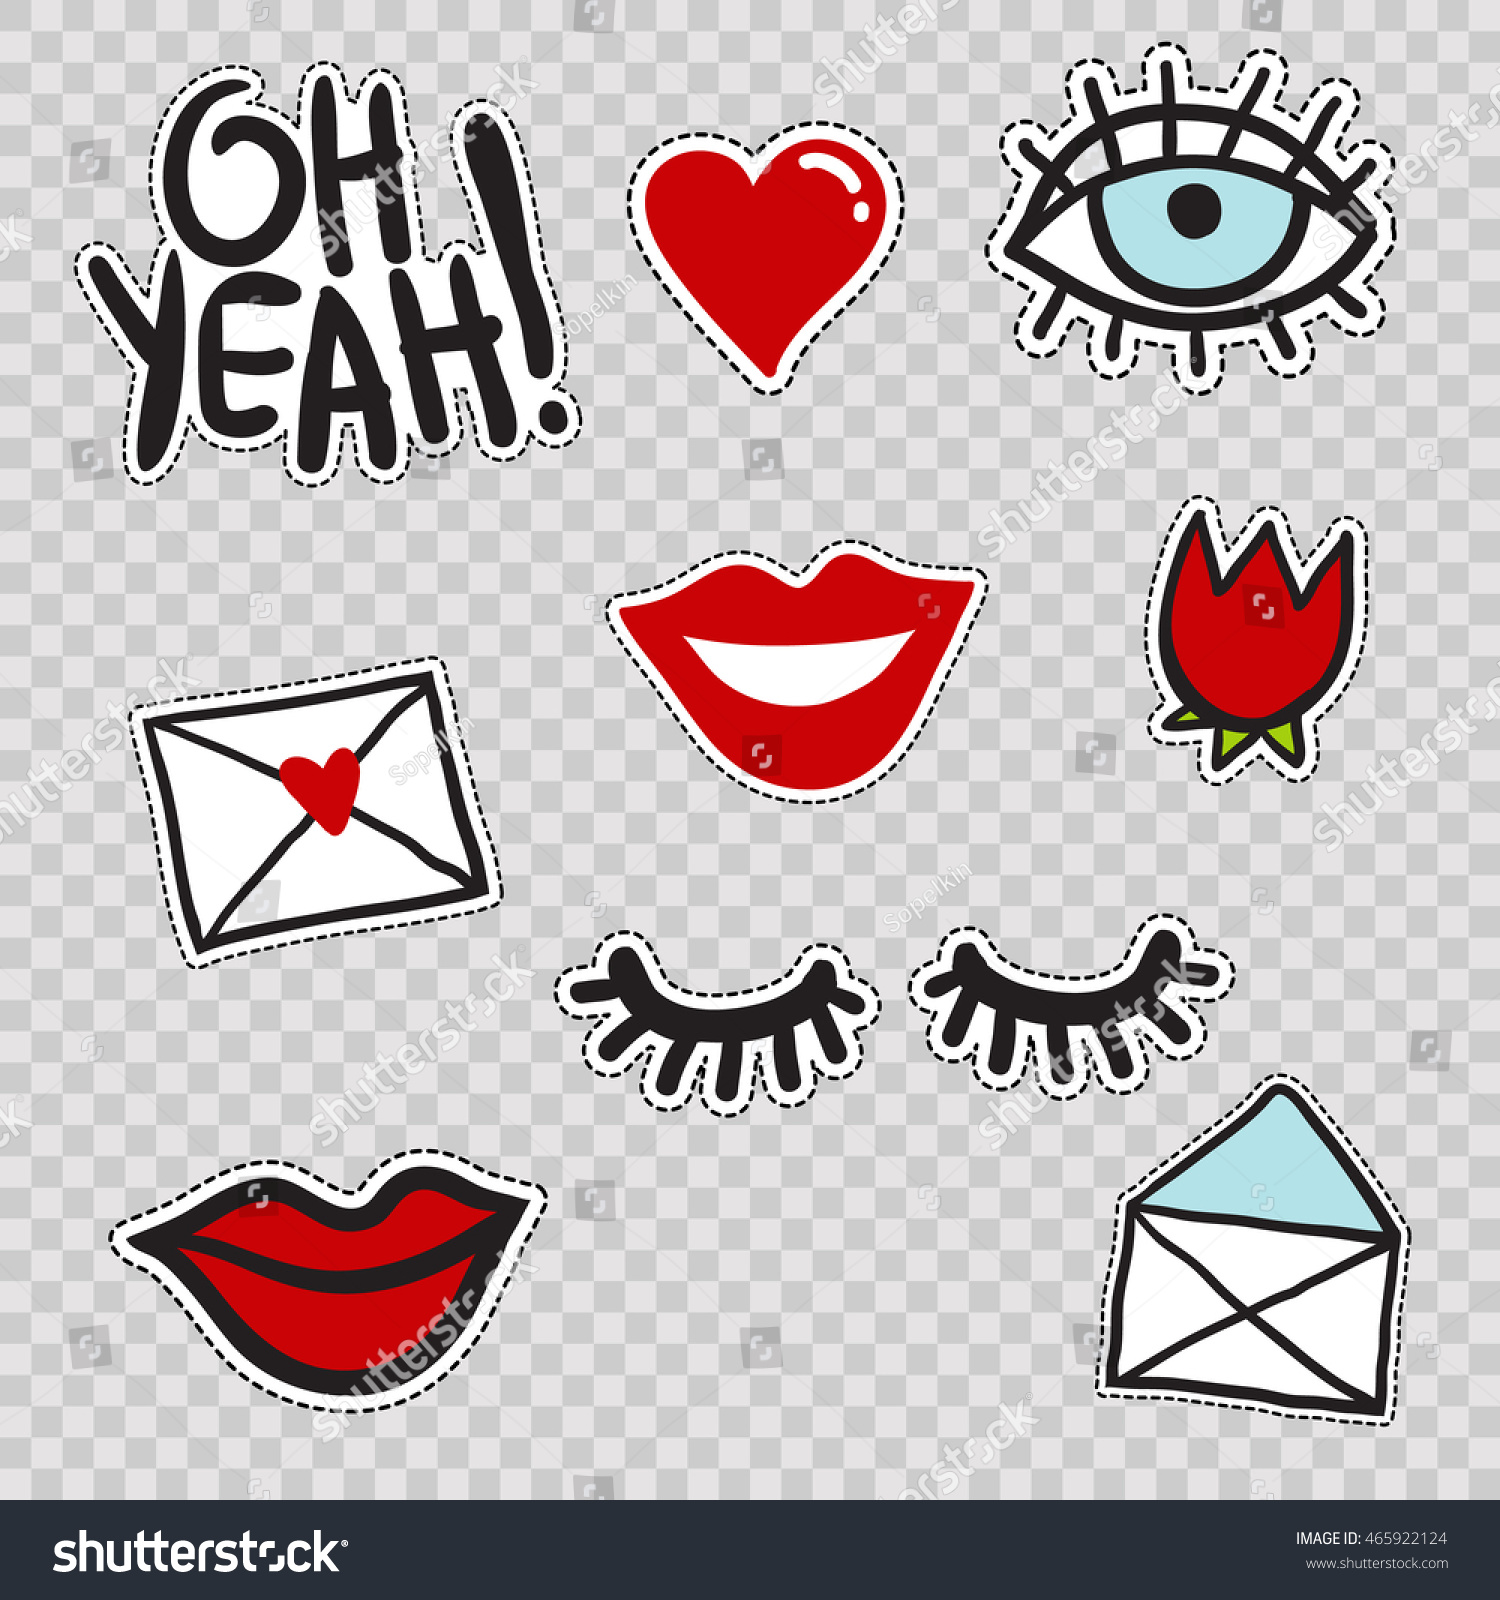 Set of cute patches elements: lowered lashes, oh yeah phrase, blue eye, red tulip flower, envelope, love mail, heart, smile lips. Vector stikers kit. Modern doodle pop art sketch badges and pins. #465922124